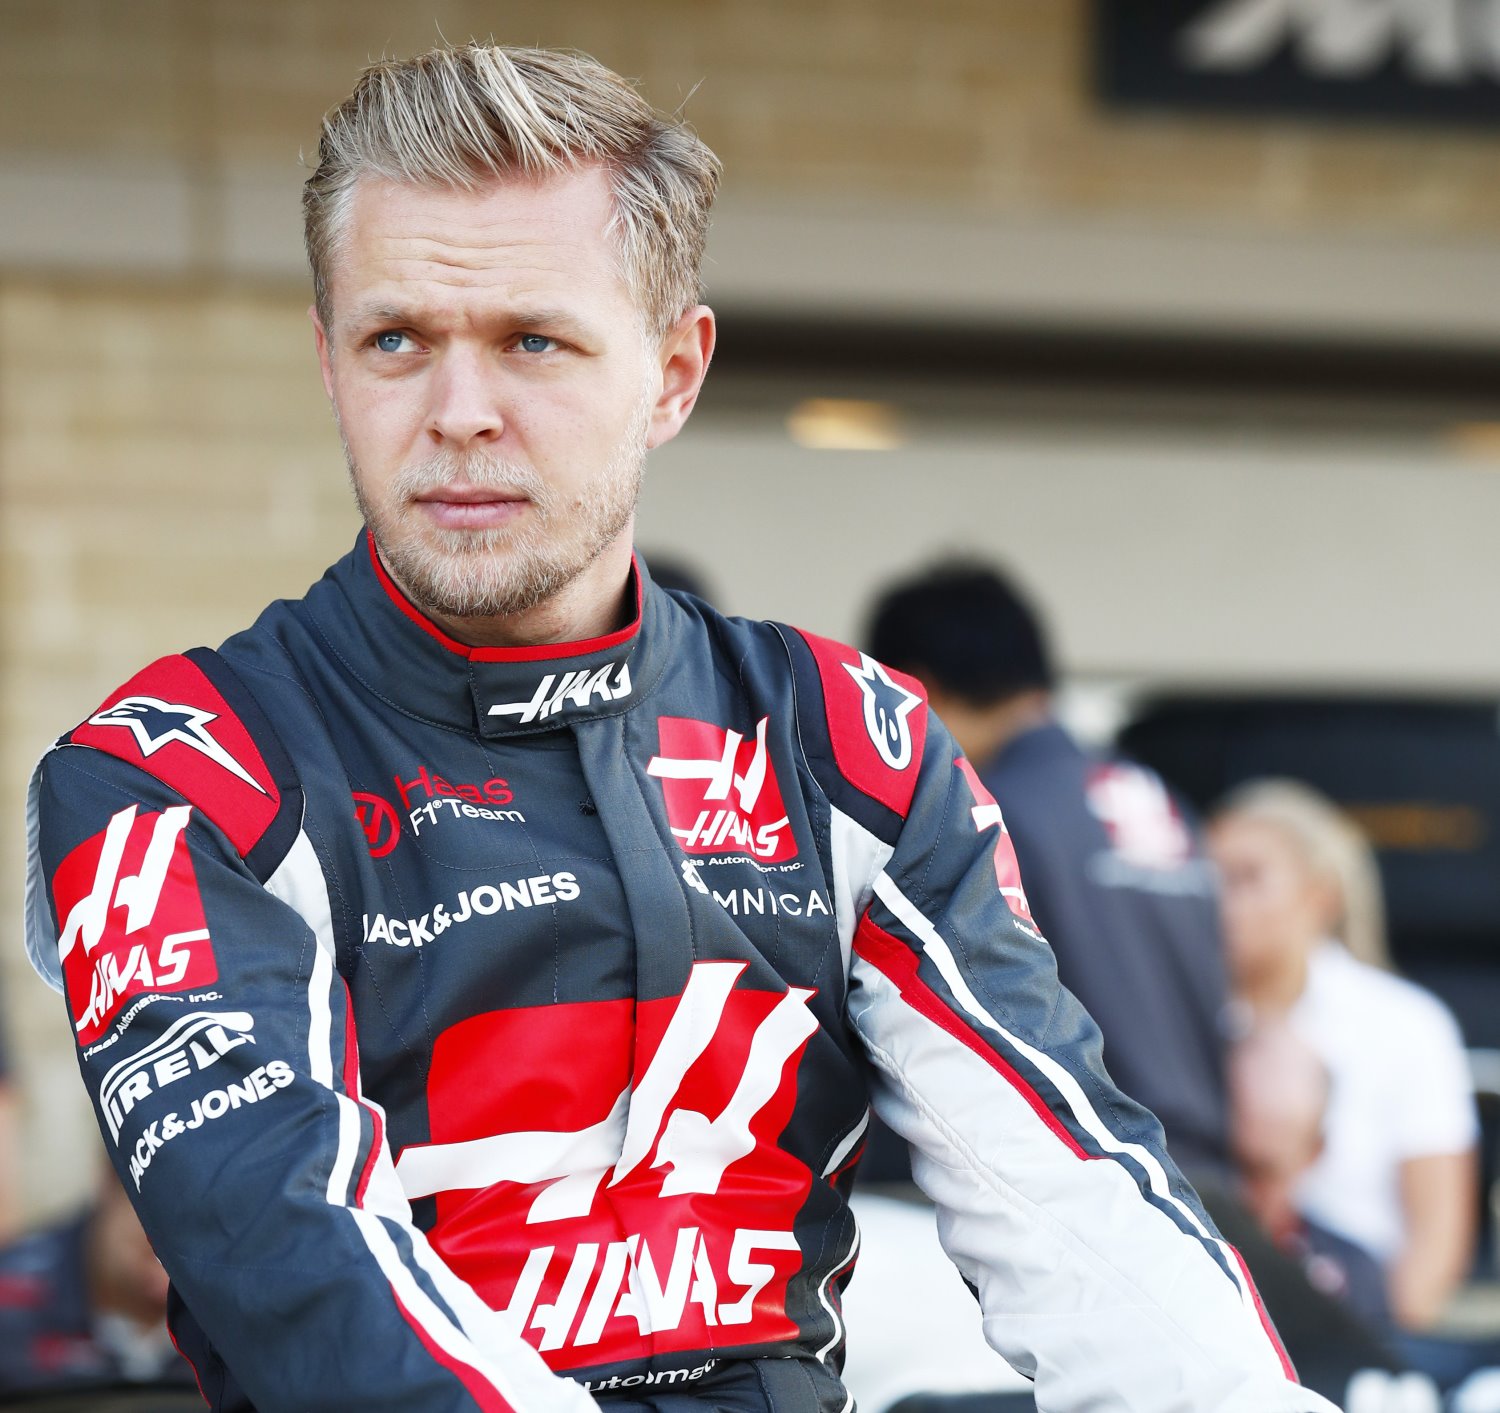 As long as he is fast enough, Kevin Magnussen plans to stay in F1